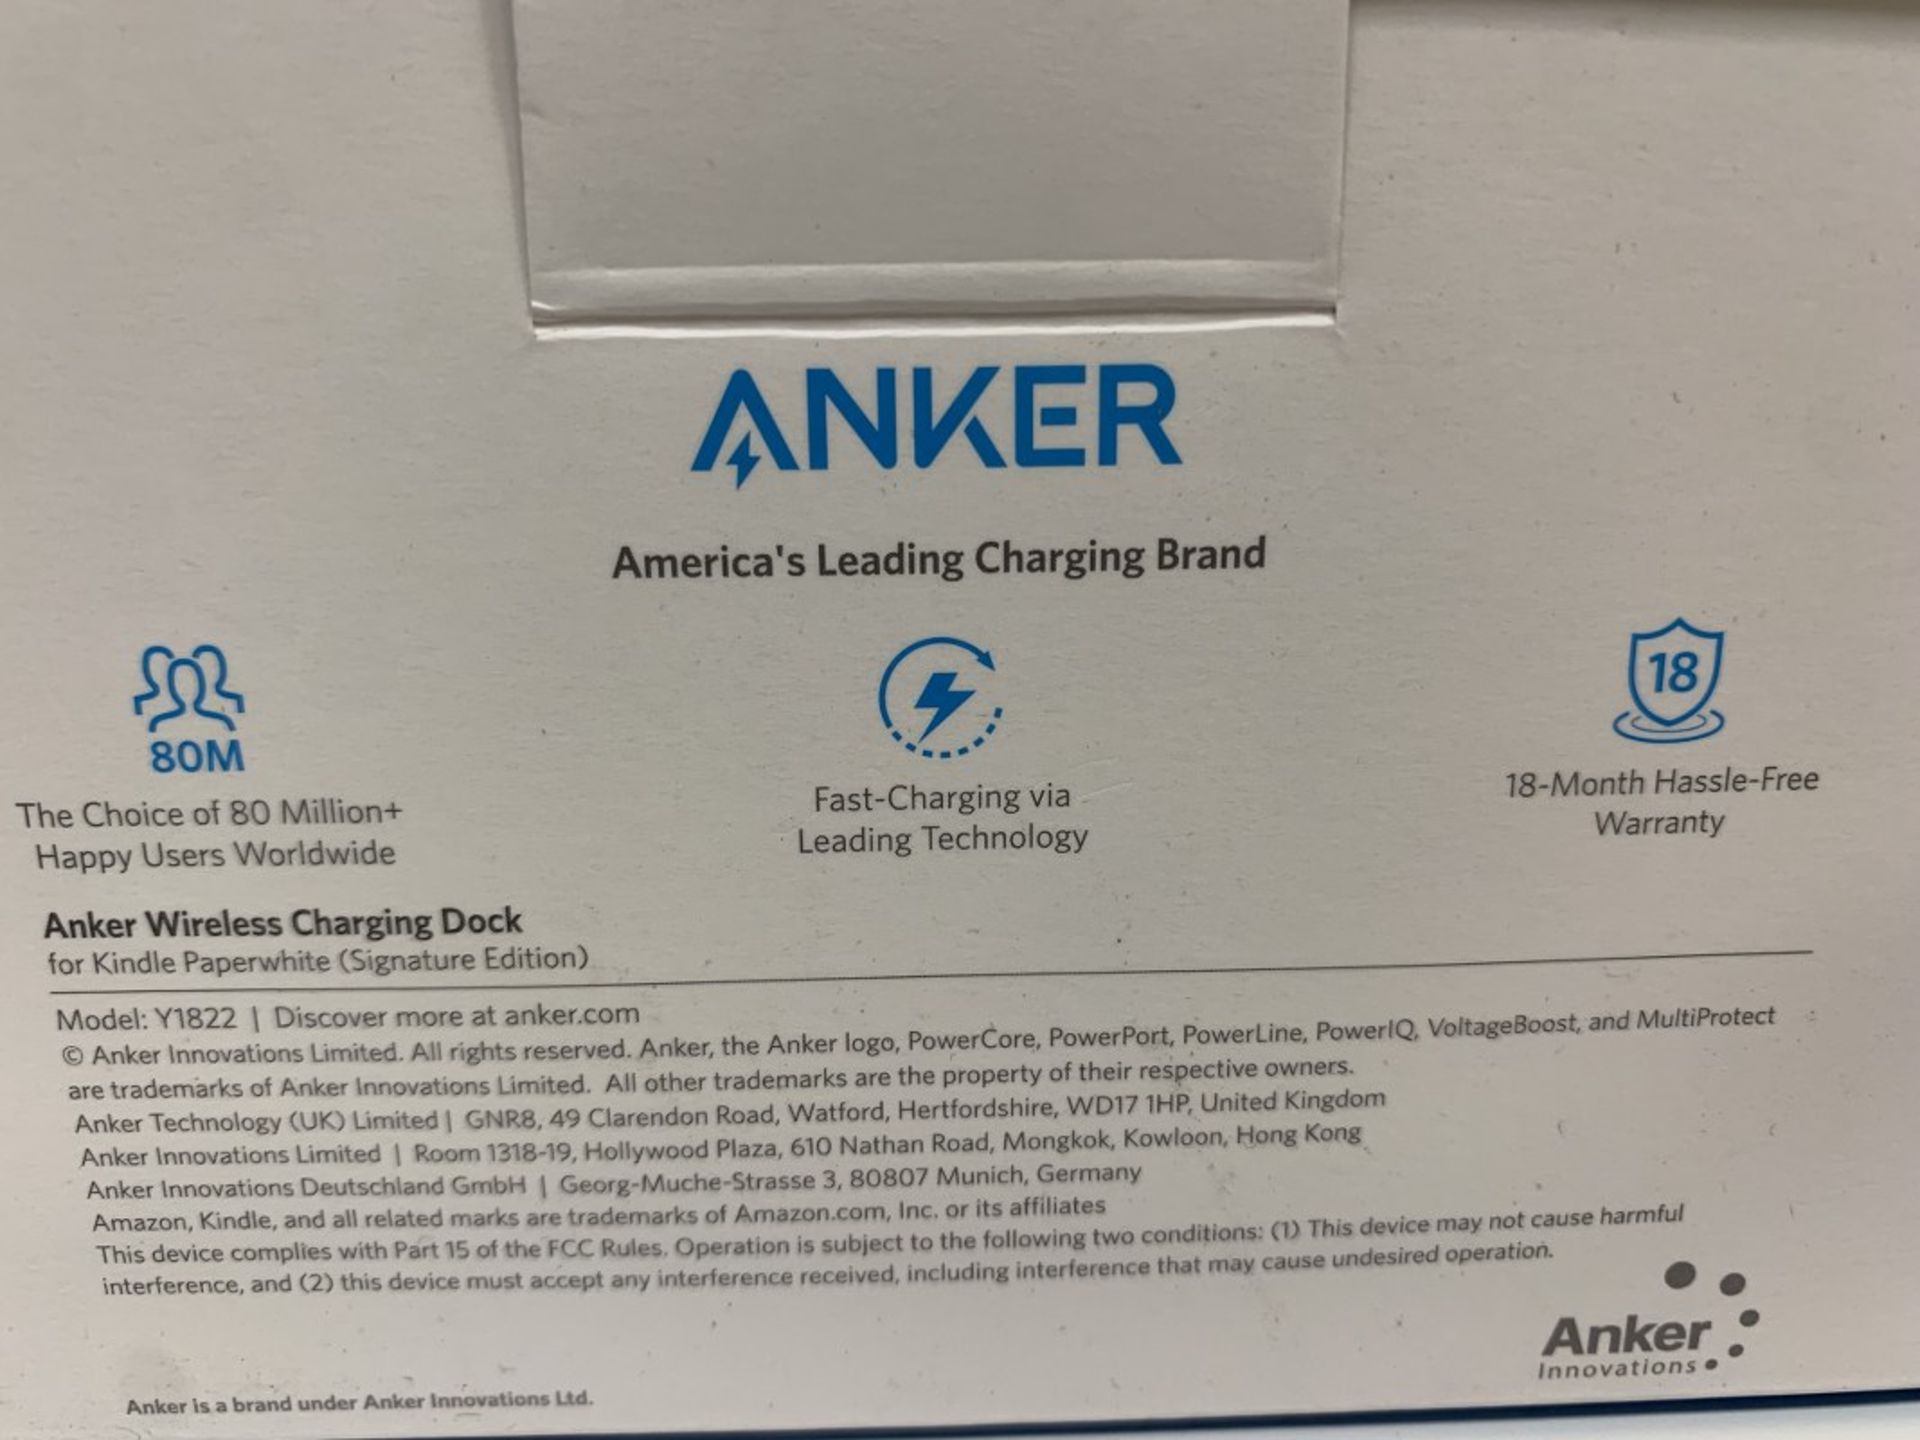 Anker - Wireless Charging Dock For Kindle Paperweight Signature Edition - Image 2 of 2